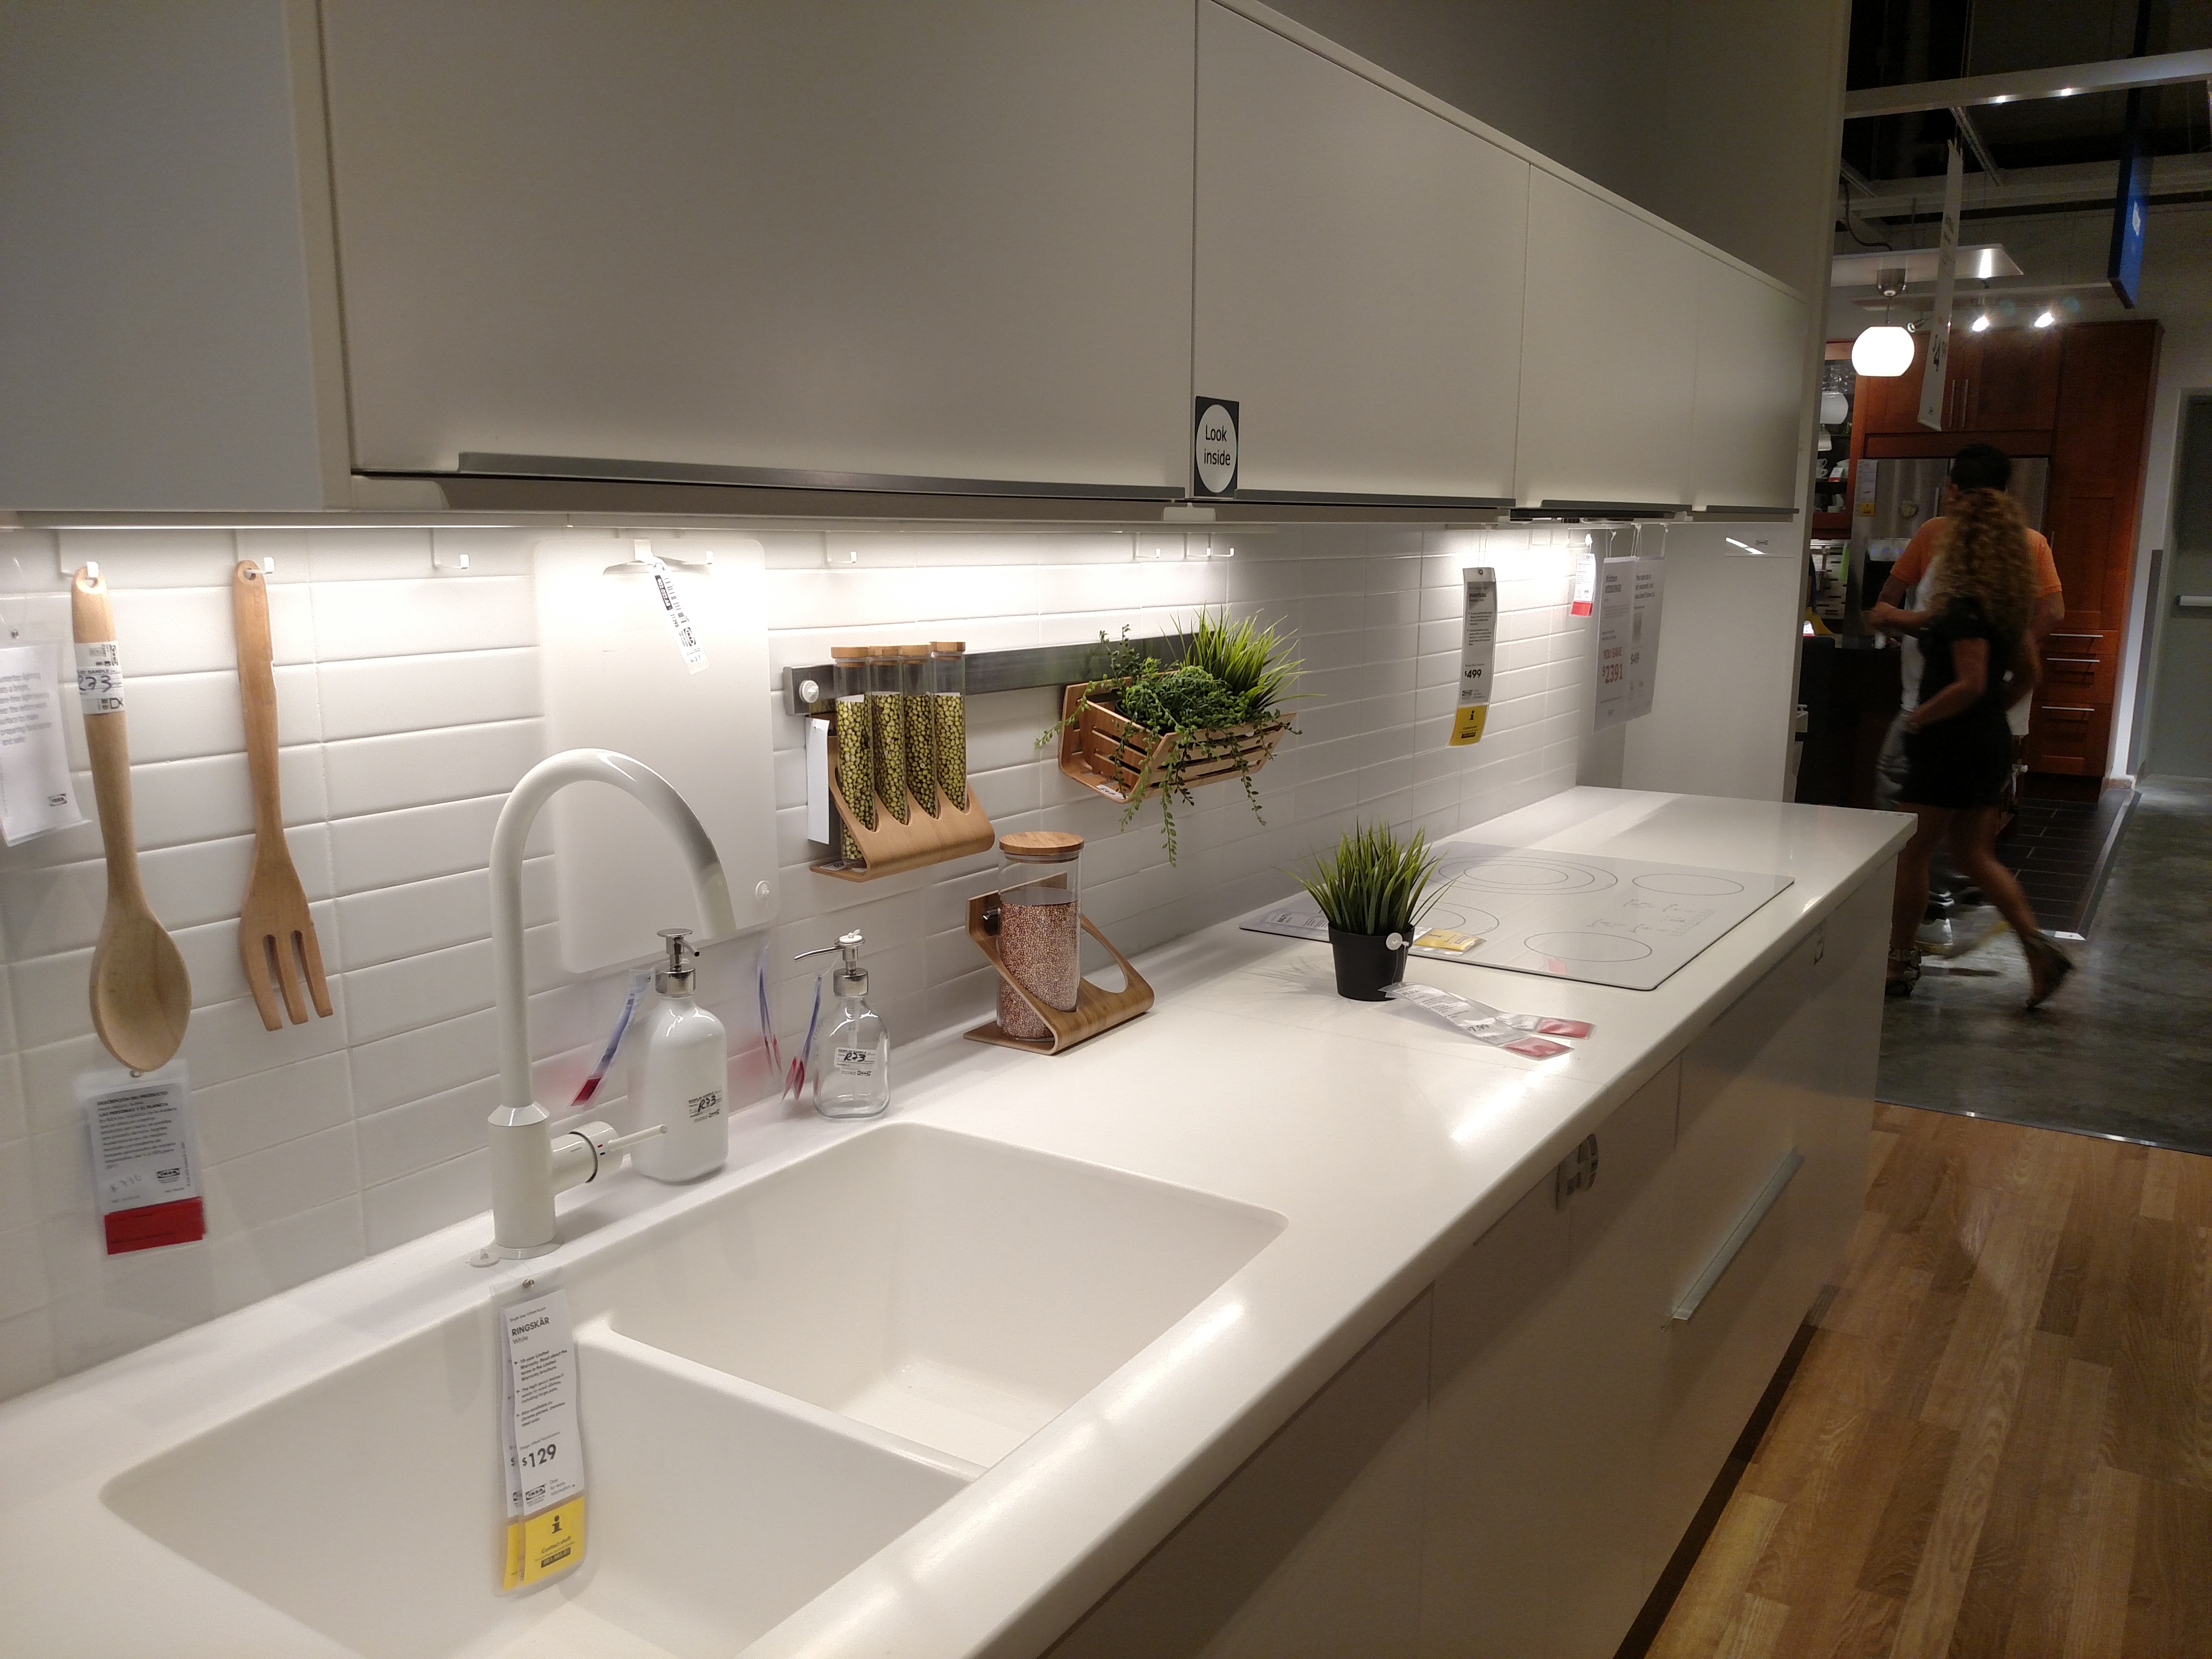 ikea sink kitchen integrated acrylic countertop personlig faucet countertops sinks backsplash invisible against showroom base lines board kitchens disappear almost